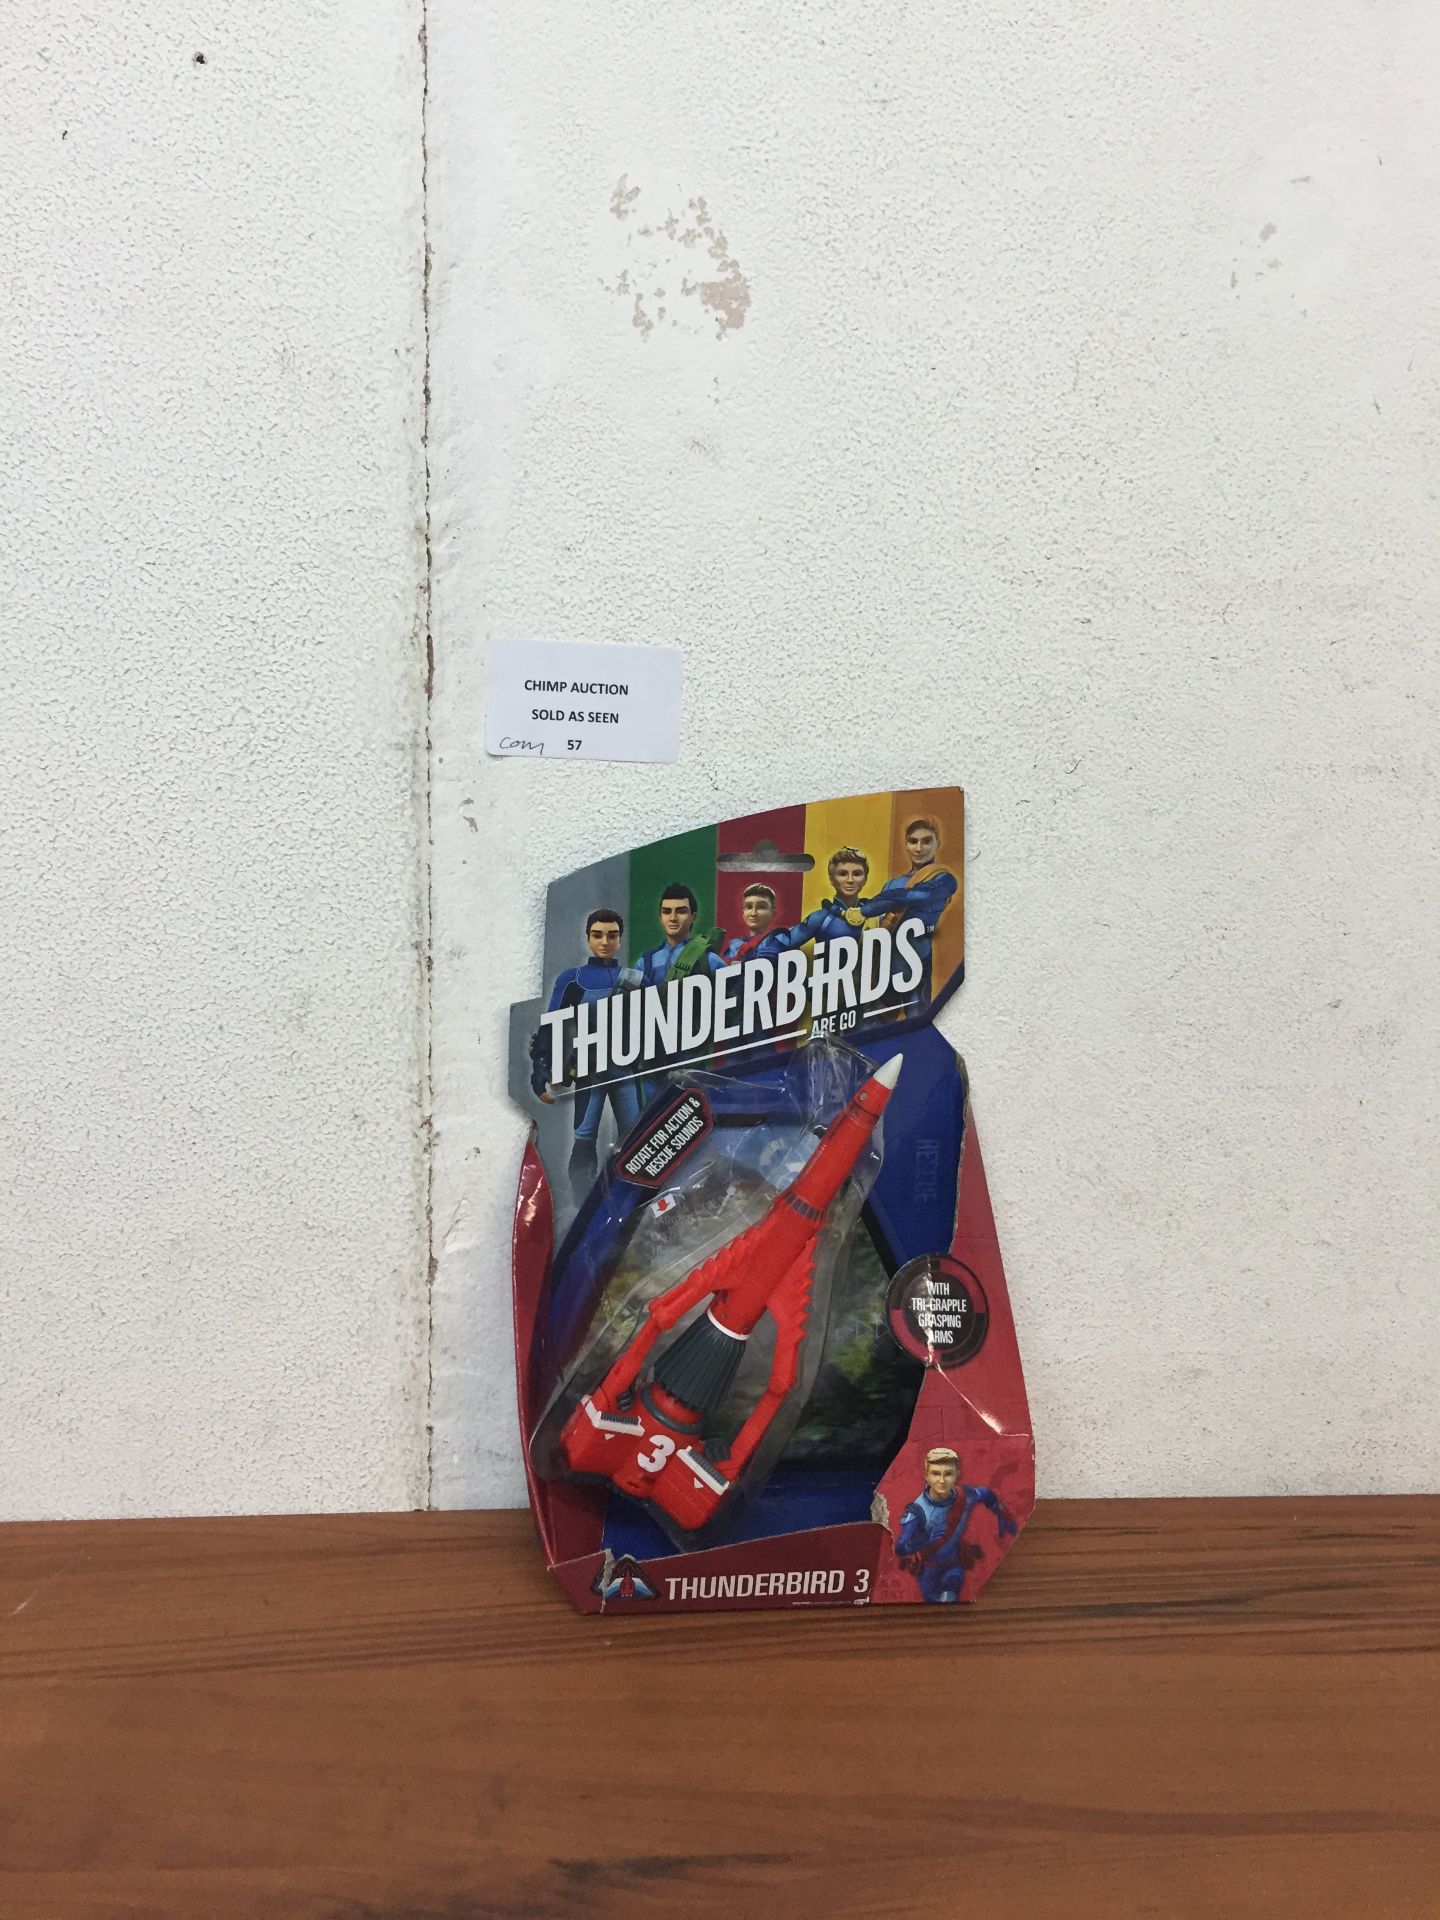 BOXED Thunderbird 3 Vehicle WITH ACTION & RESCUE SOUNDS RRP £14.99 CHANGE OF MIND